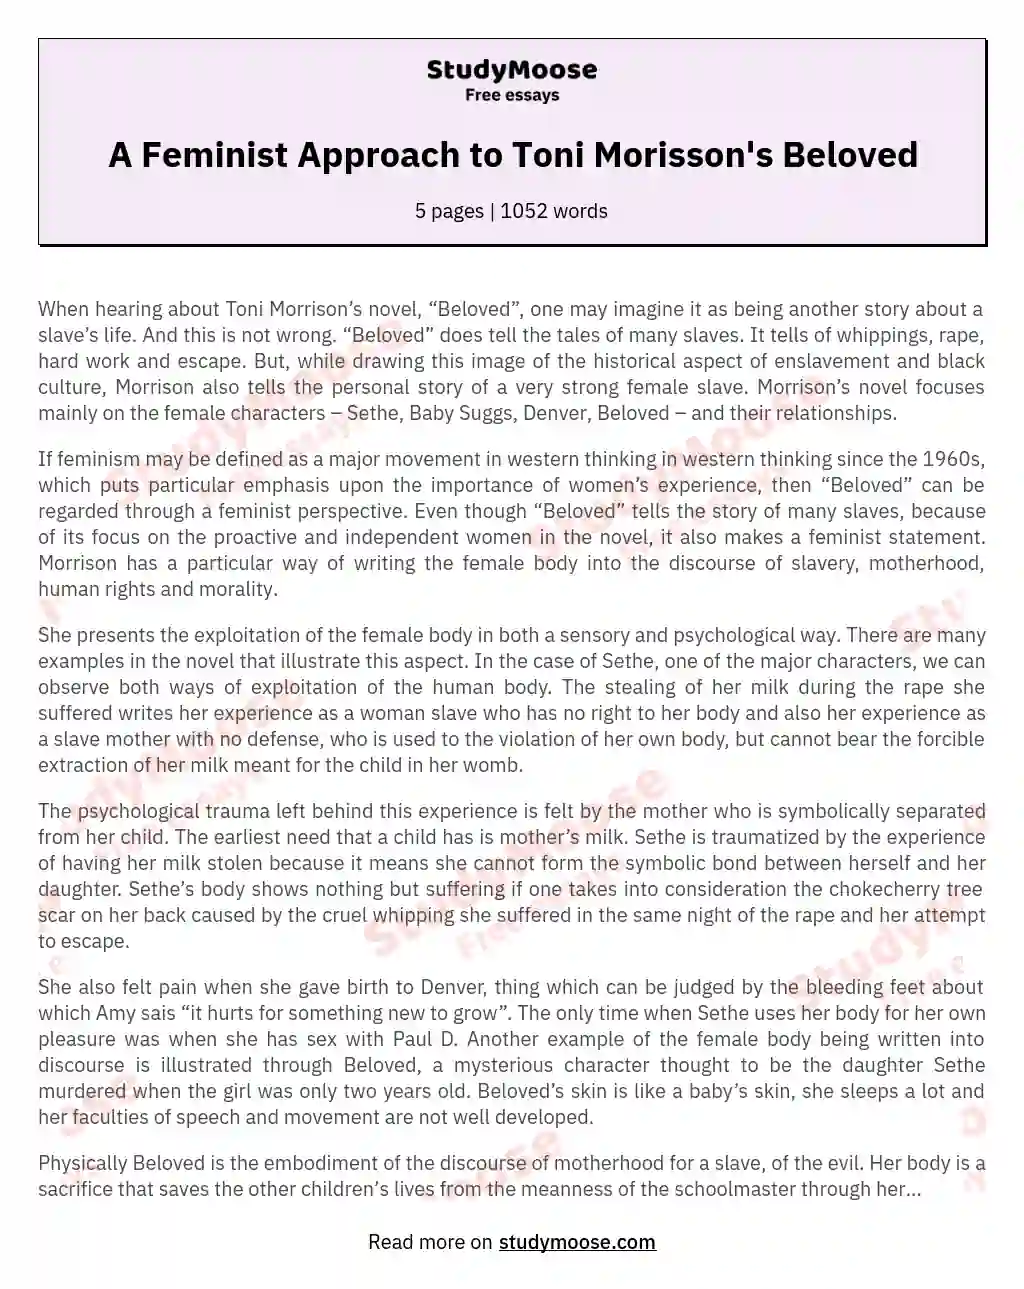 A Feminist Approach to Toni Morisson's Beloved essay